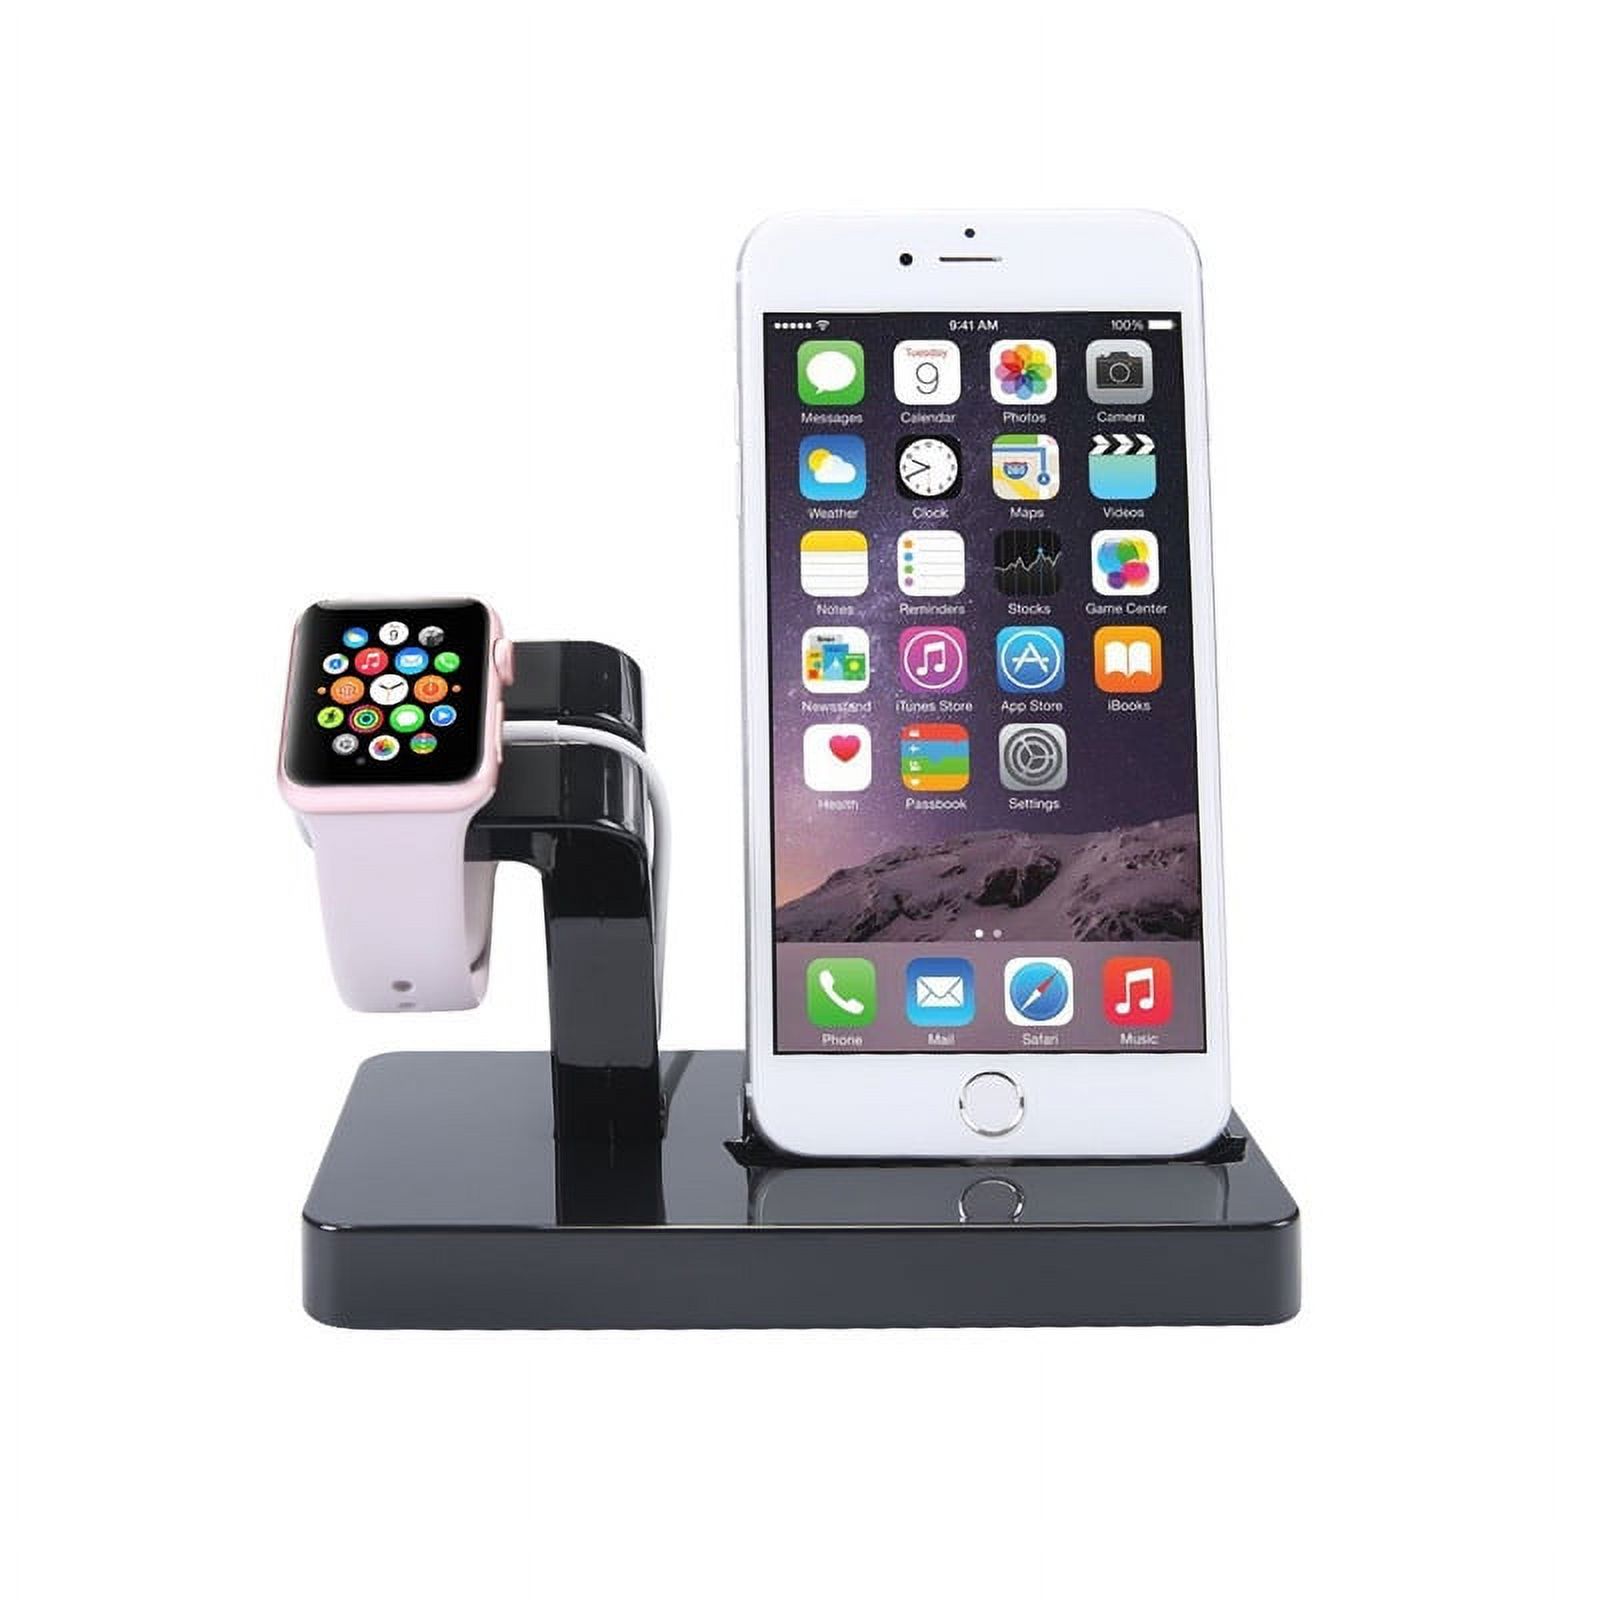 Charging dock,2 in 1 Stand Holder & Charging Docking Station, Charger Stand Dock Compatible with Apple Watch Series 3 2 1, iWatch, iPhone, iPod -Black - image 1 of 8